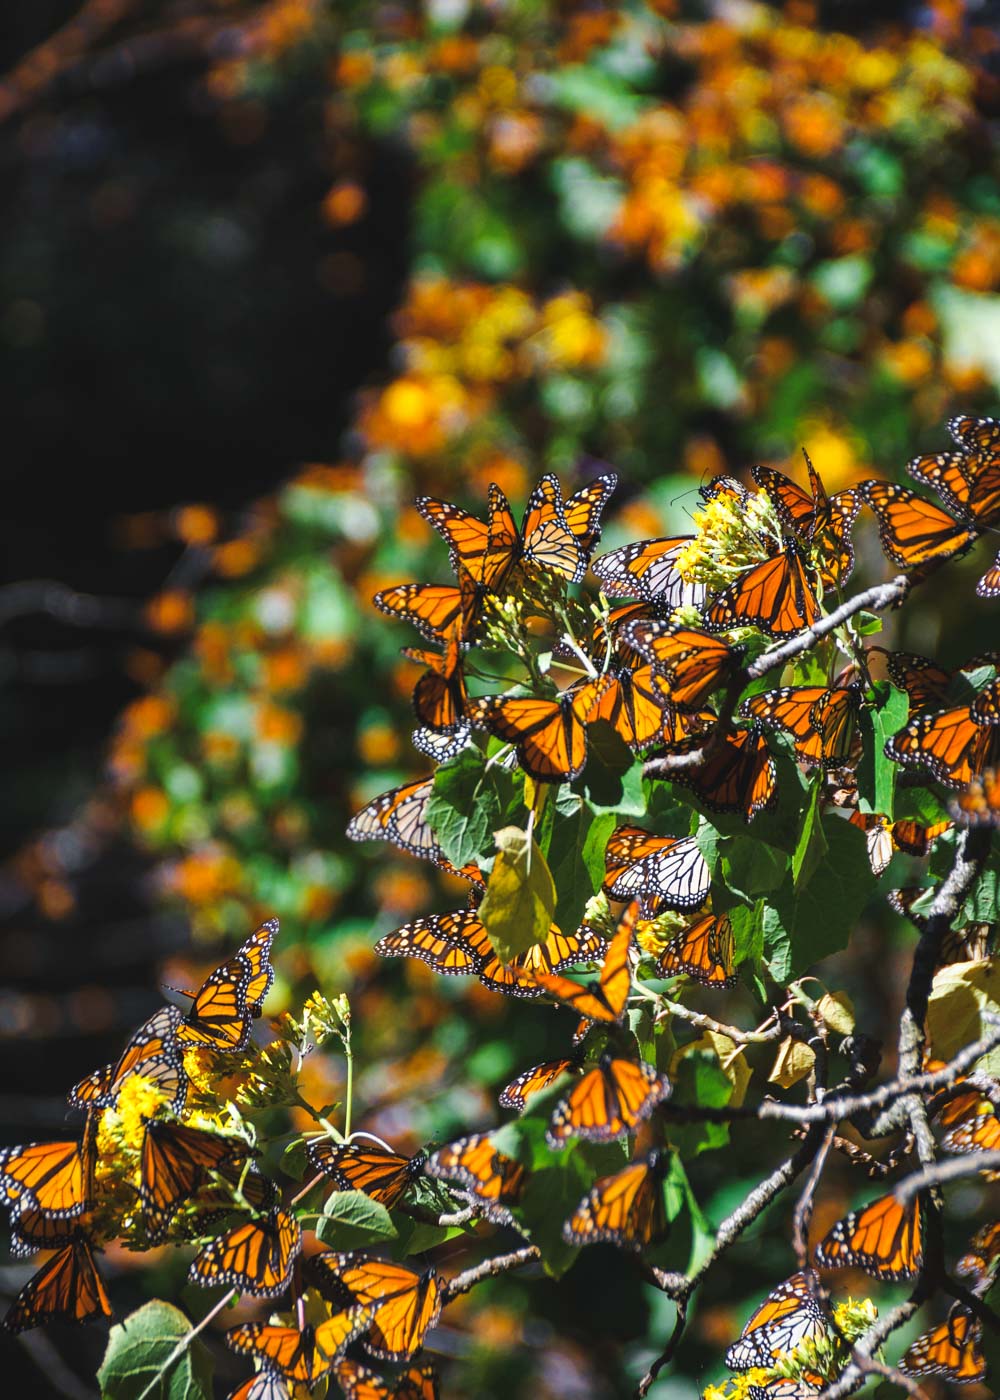 A large group of monarch butterflies taking up all the space on the tree branches.